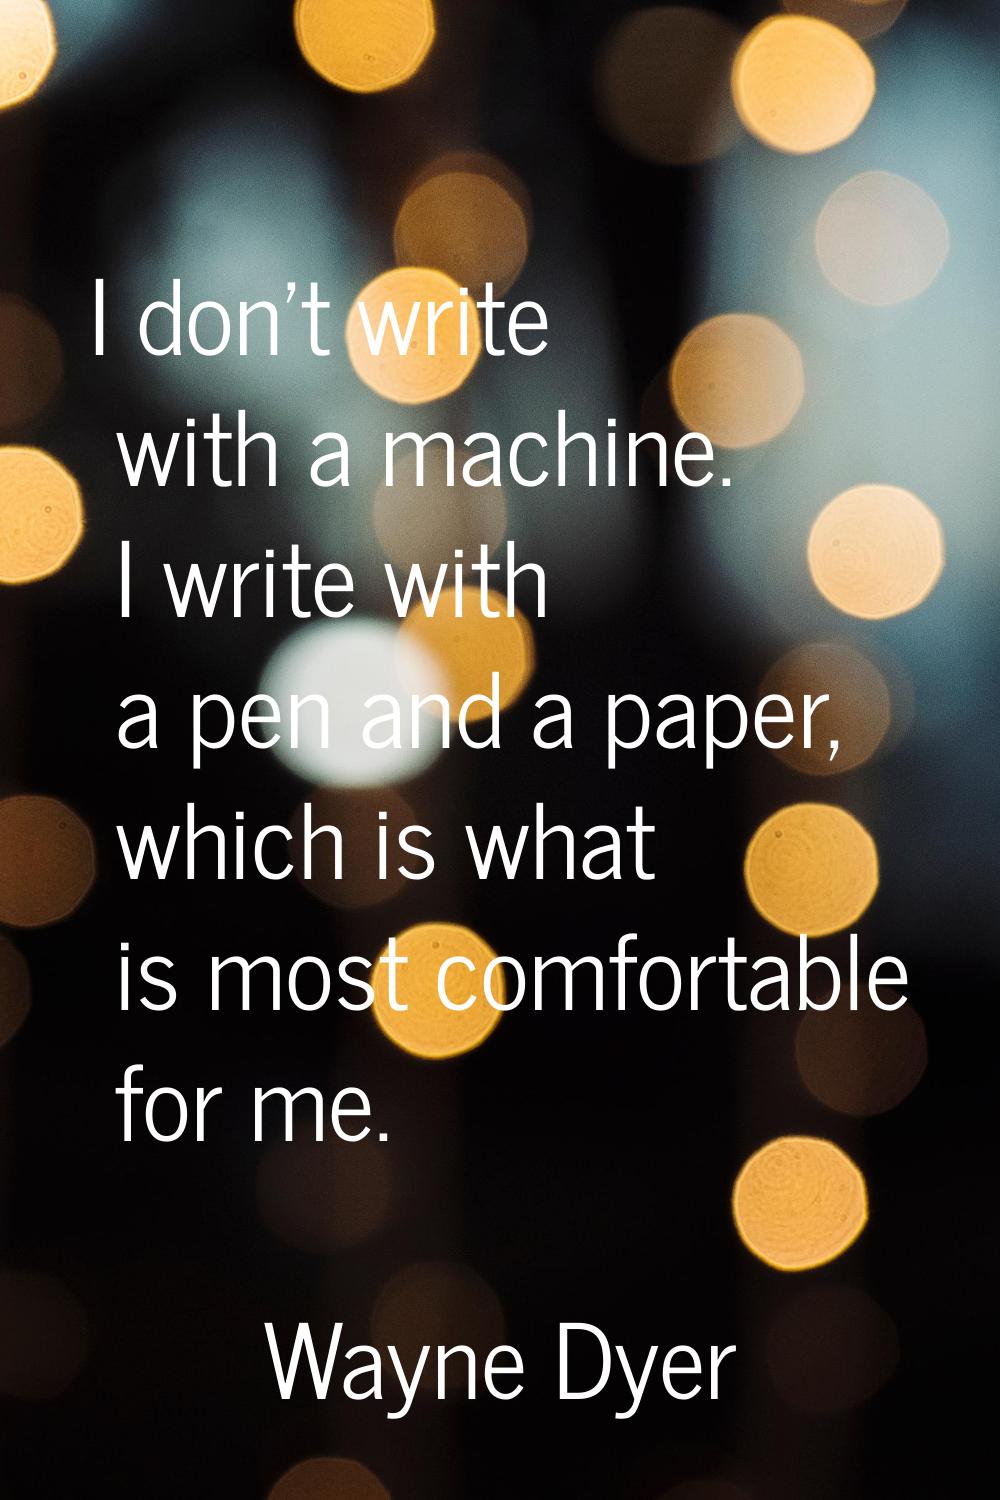 I don't write with a machine. I write with a pen and a paper, which is what is most comfortable for